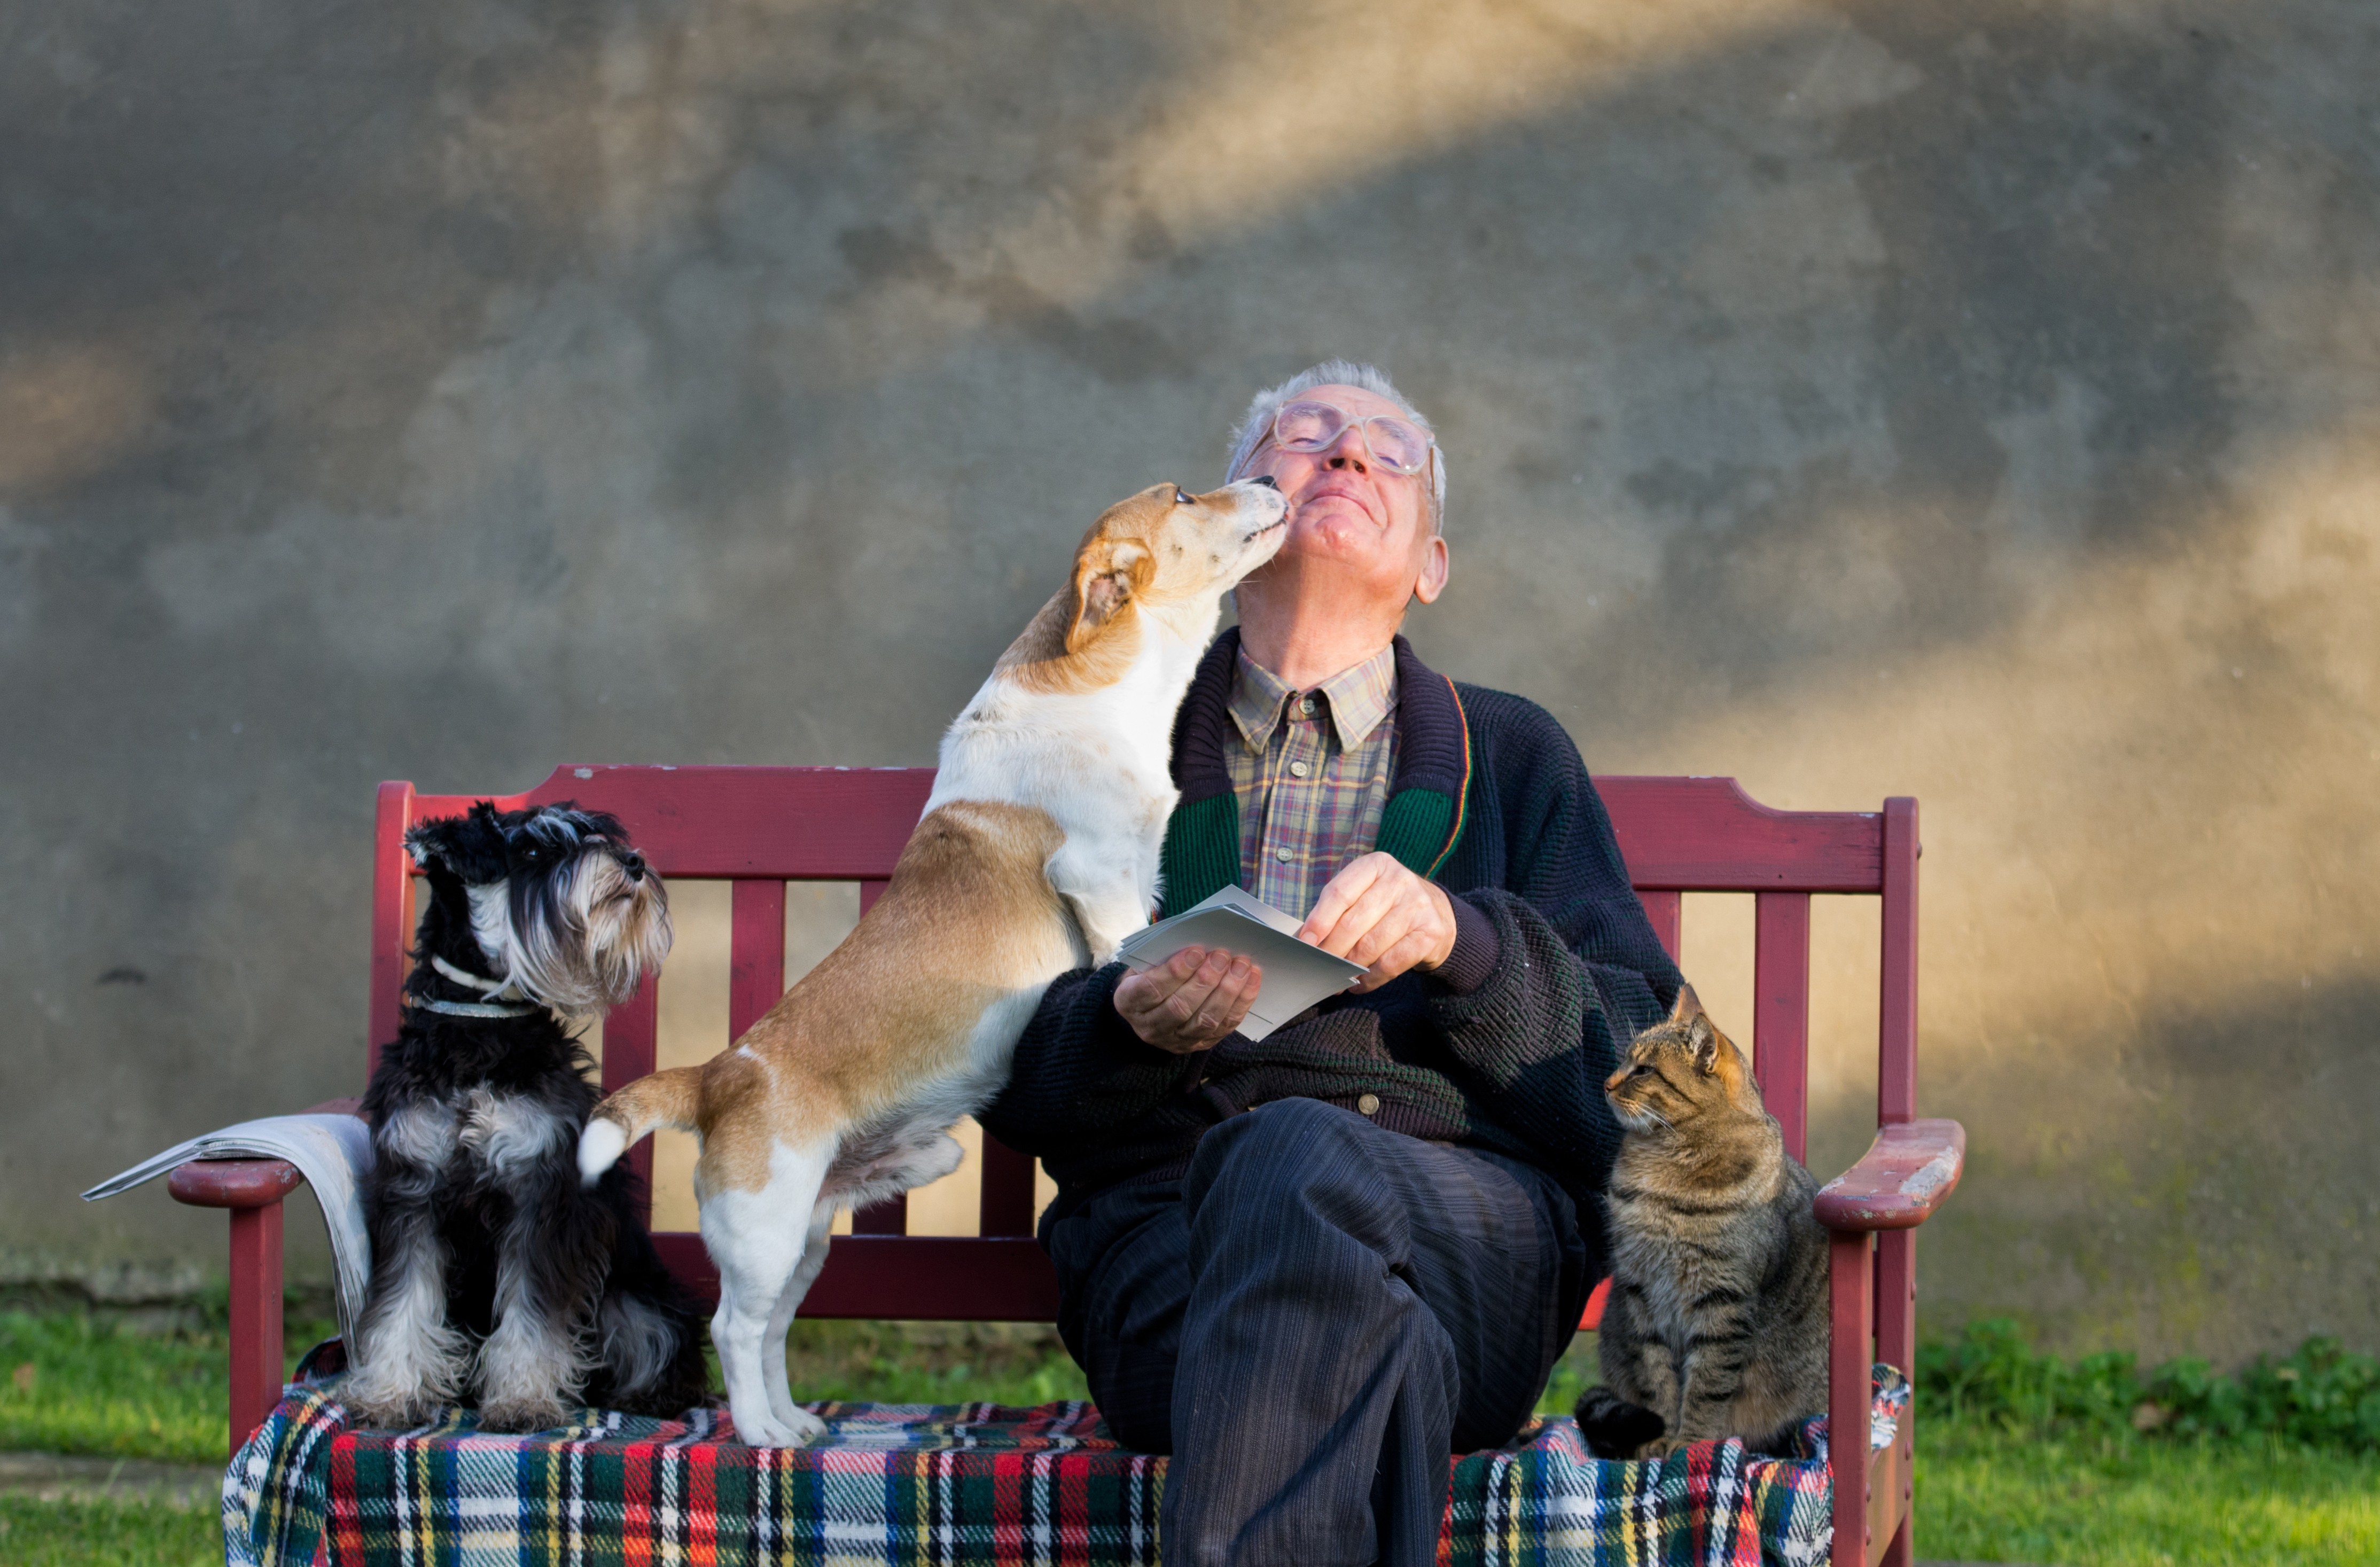 The increasing share of elderly population in Hong Kong and the loneliness that comes with the advancing years have led many seniors to be emotionally attached to their pets. Photo: Shutterstock